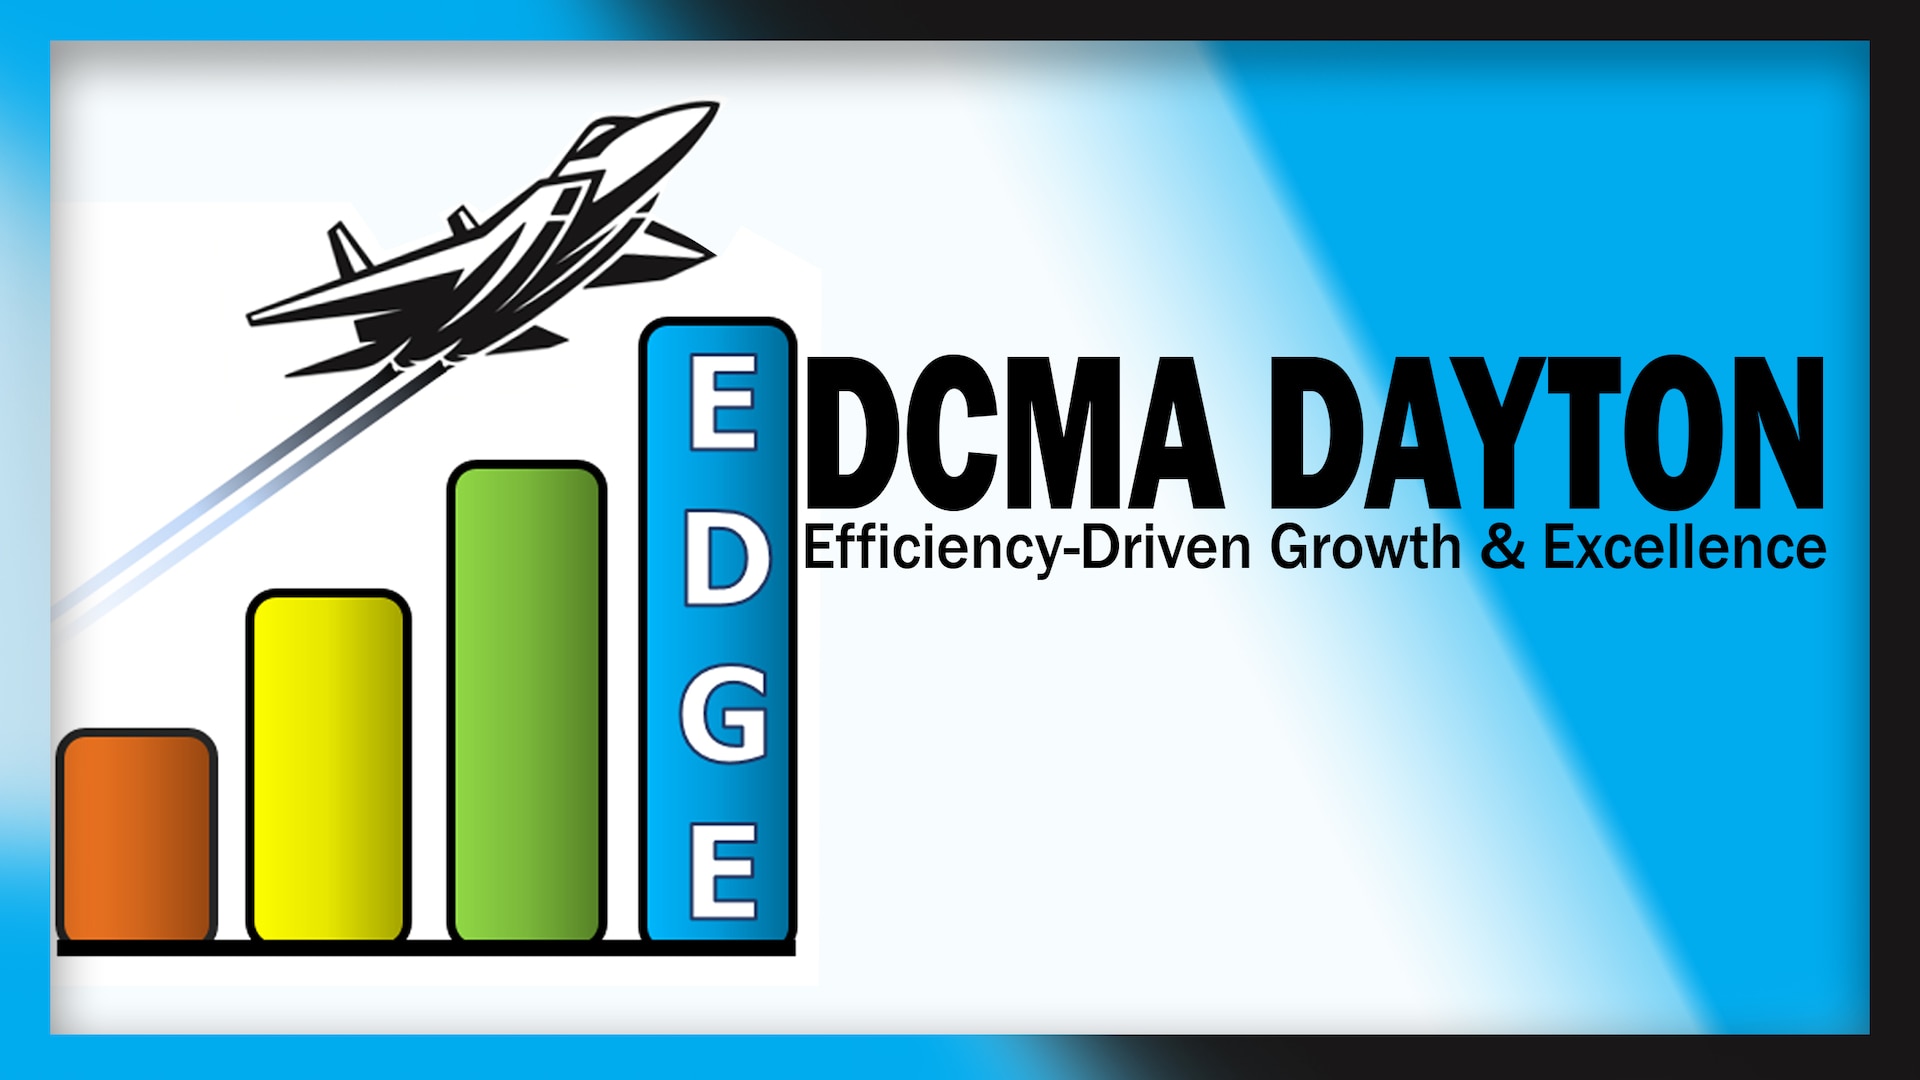 For Defense Contract Management Agency Dayton, the path to excellence in its warfighter support mission is through an engaged workforce, armed with the tools and mindset to solve complex problems. To build that culture, the Dayton team designed a process called Efficiency-Driven Growth and Excellence, known as EDGE. (DCMA graphic by Cheryl Jamieson)